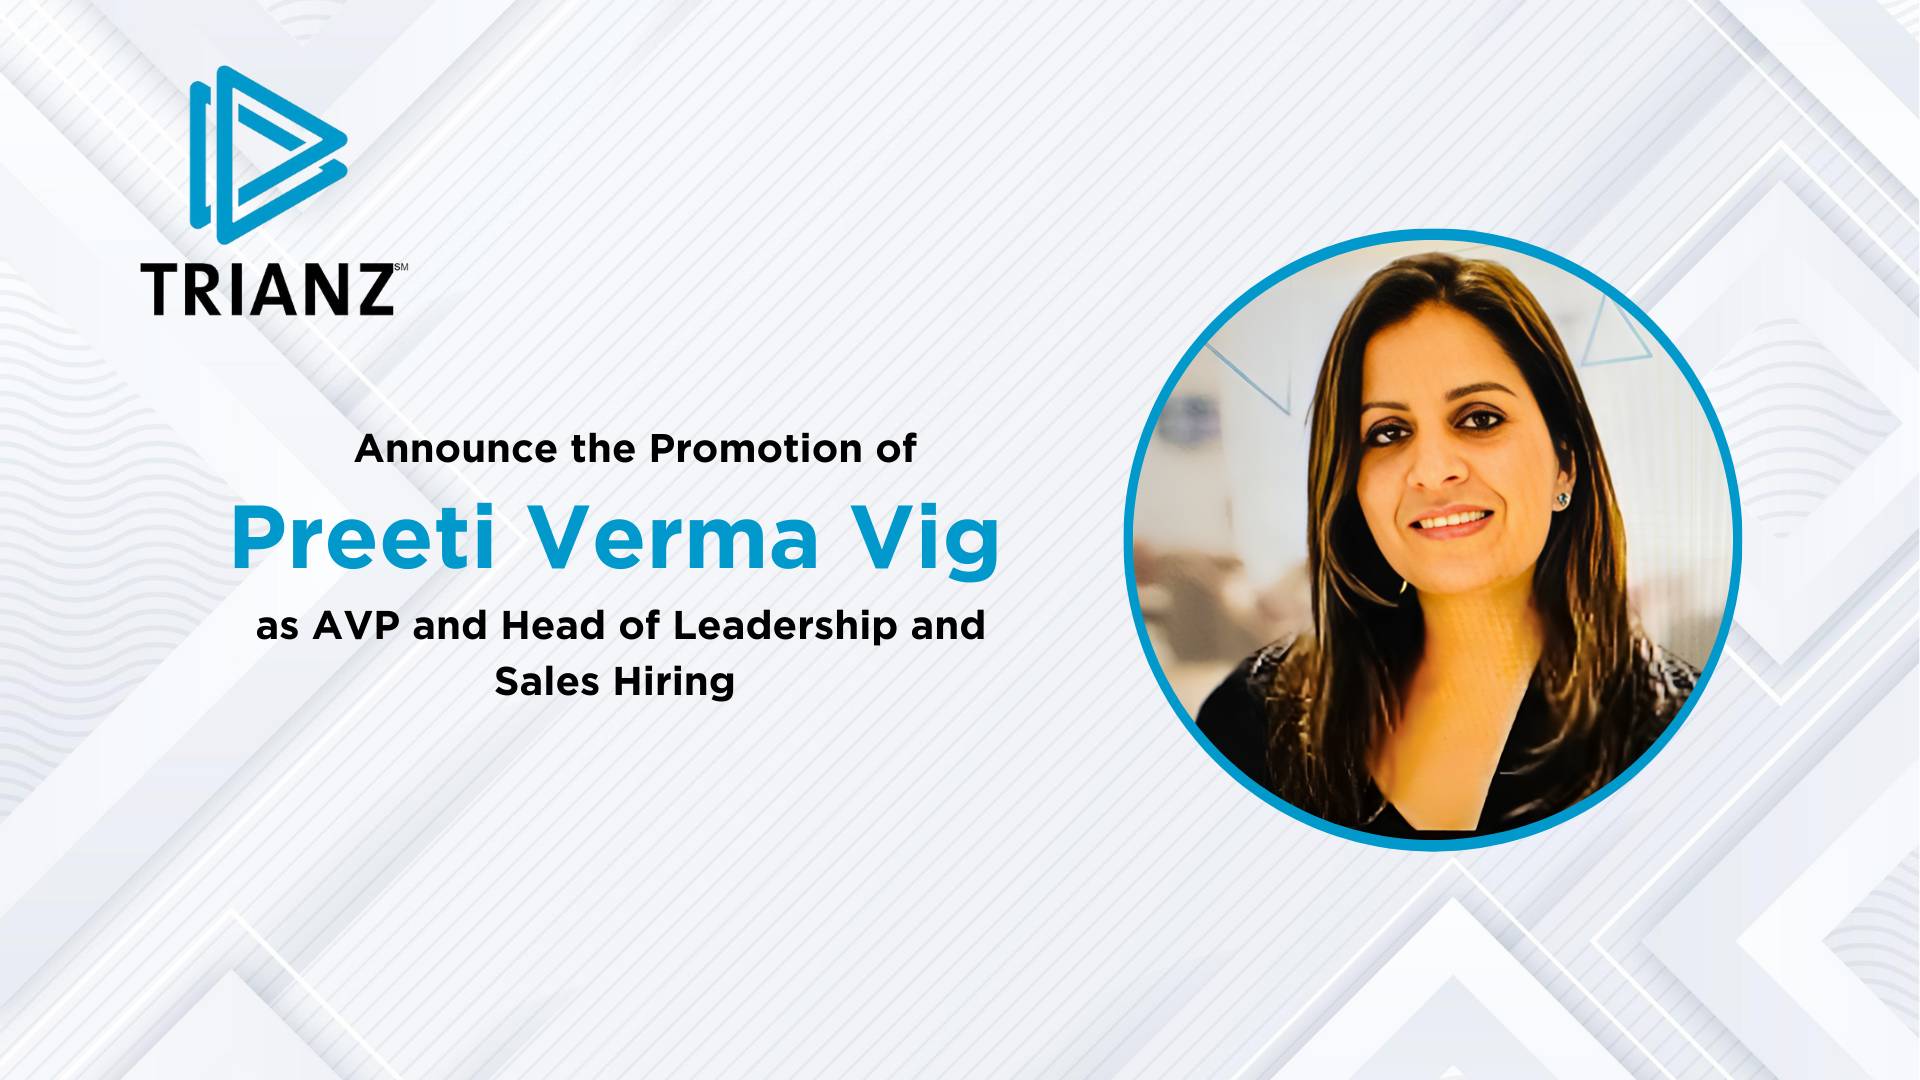 Trianz Strengthens Talent Acquisition with the Appointment of Preeti Verma Vig as AVP & Head of Leadership & Sales Hiring